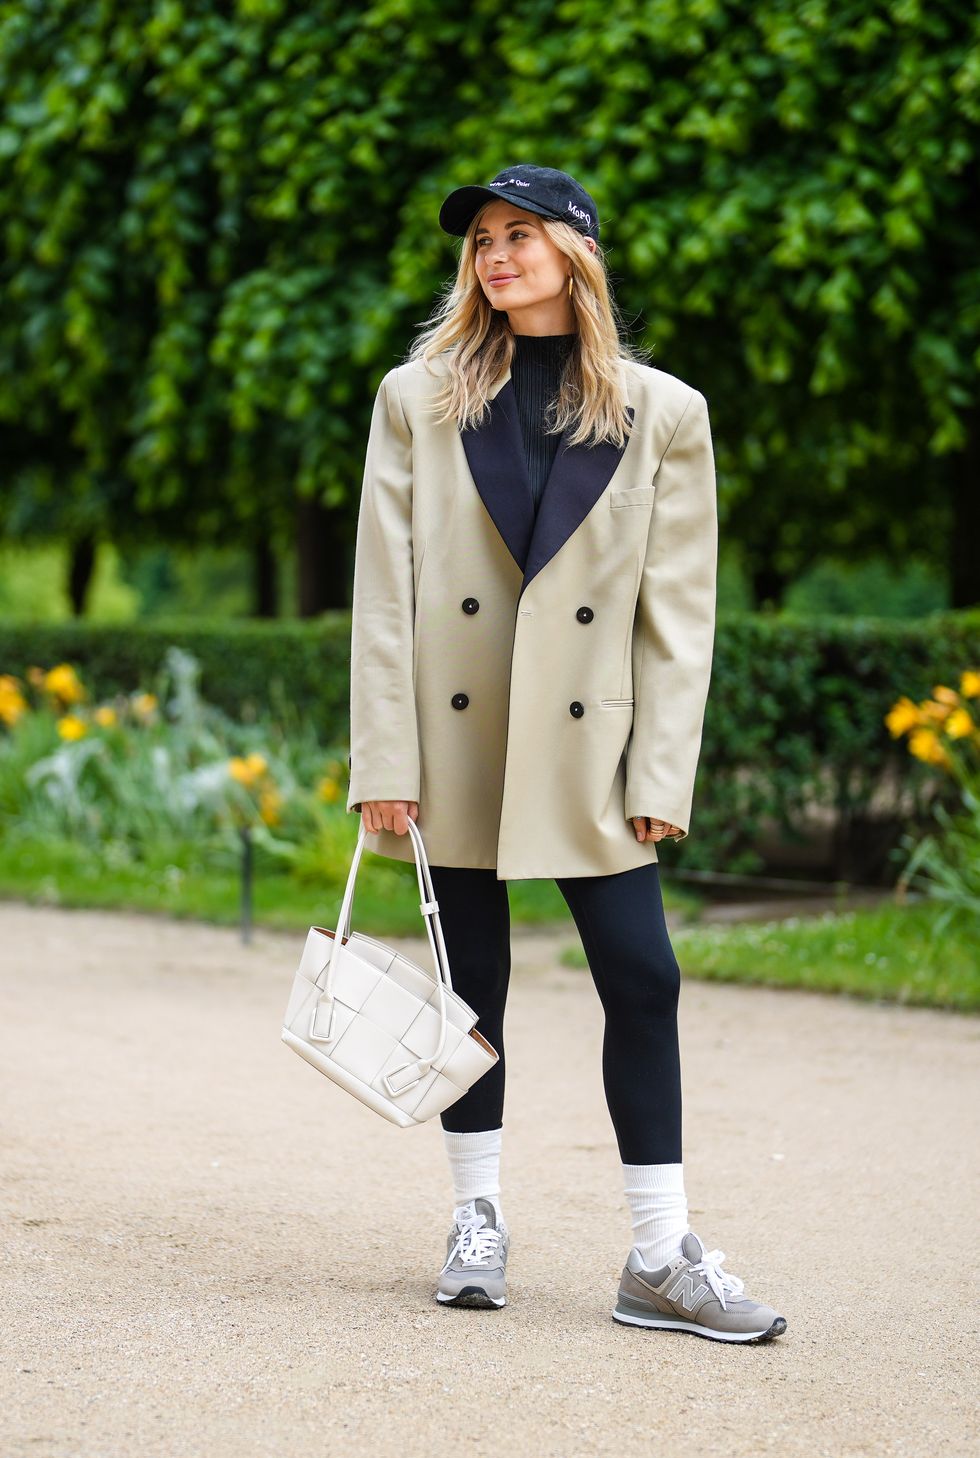 Winter Outfits to Wear Based on Your Zodiac Signbest fashion wear